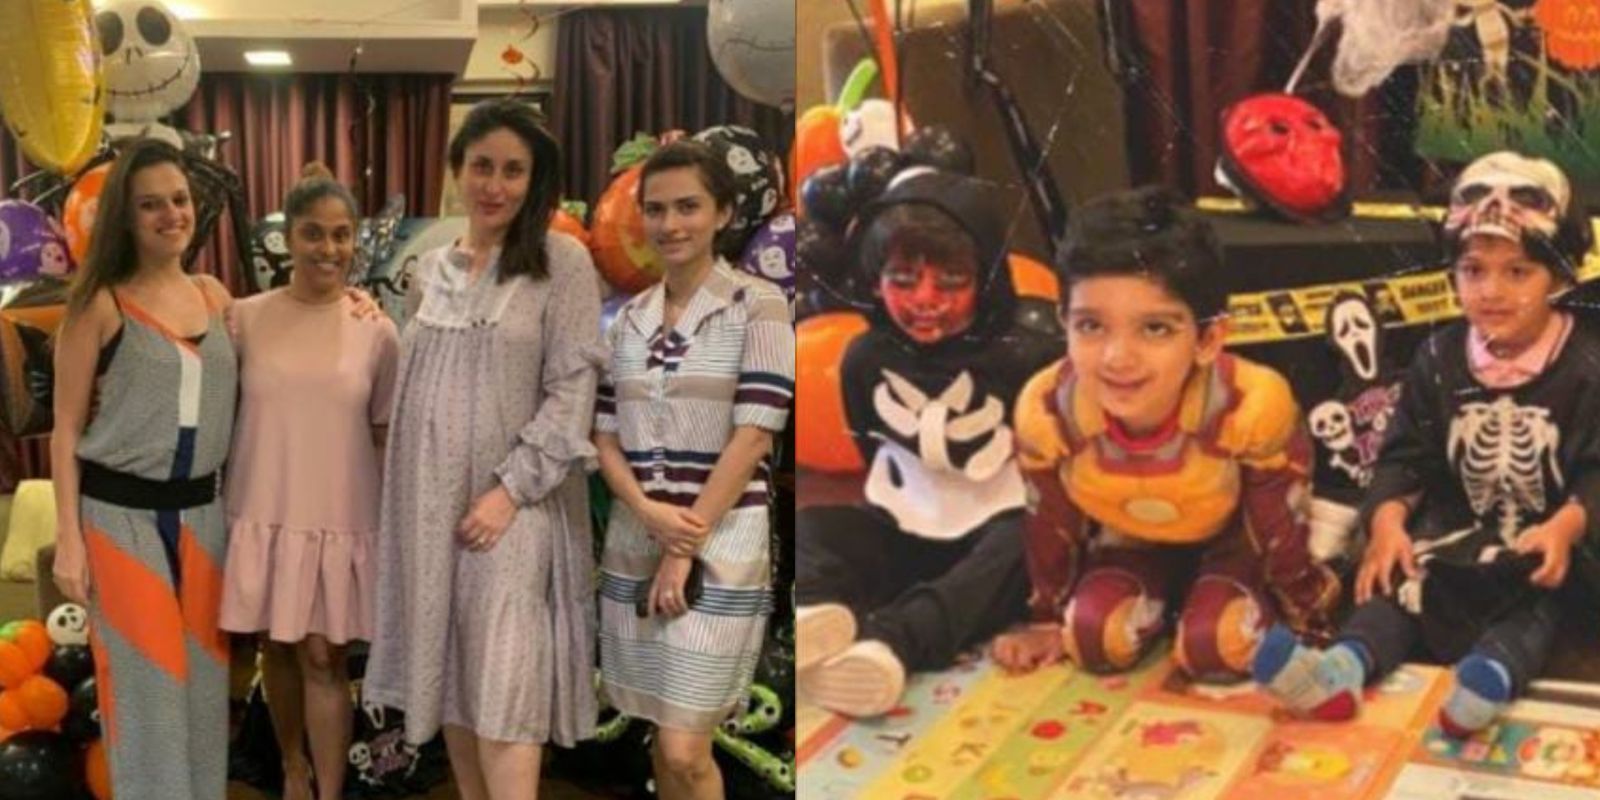 Kareena Kapoor Khan Shares Pictures From Her Halloween Party; Son Taimur Is Unrecognizable